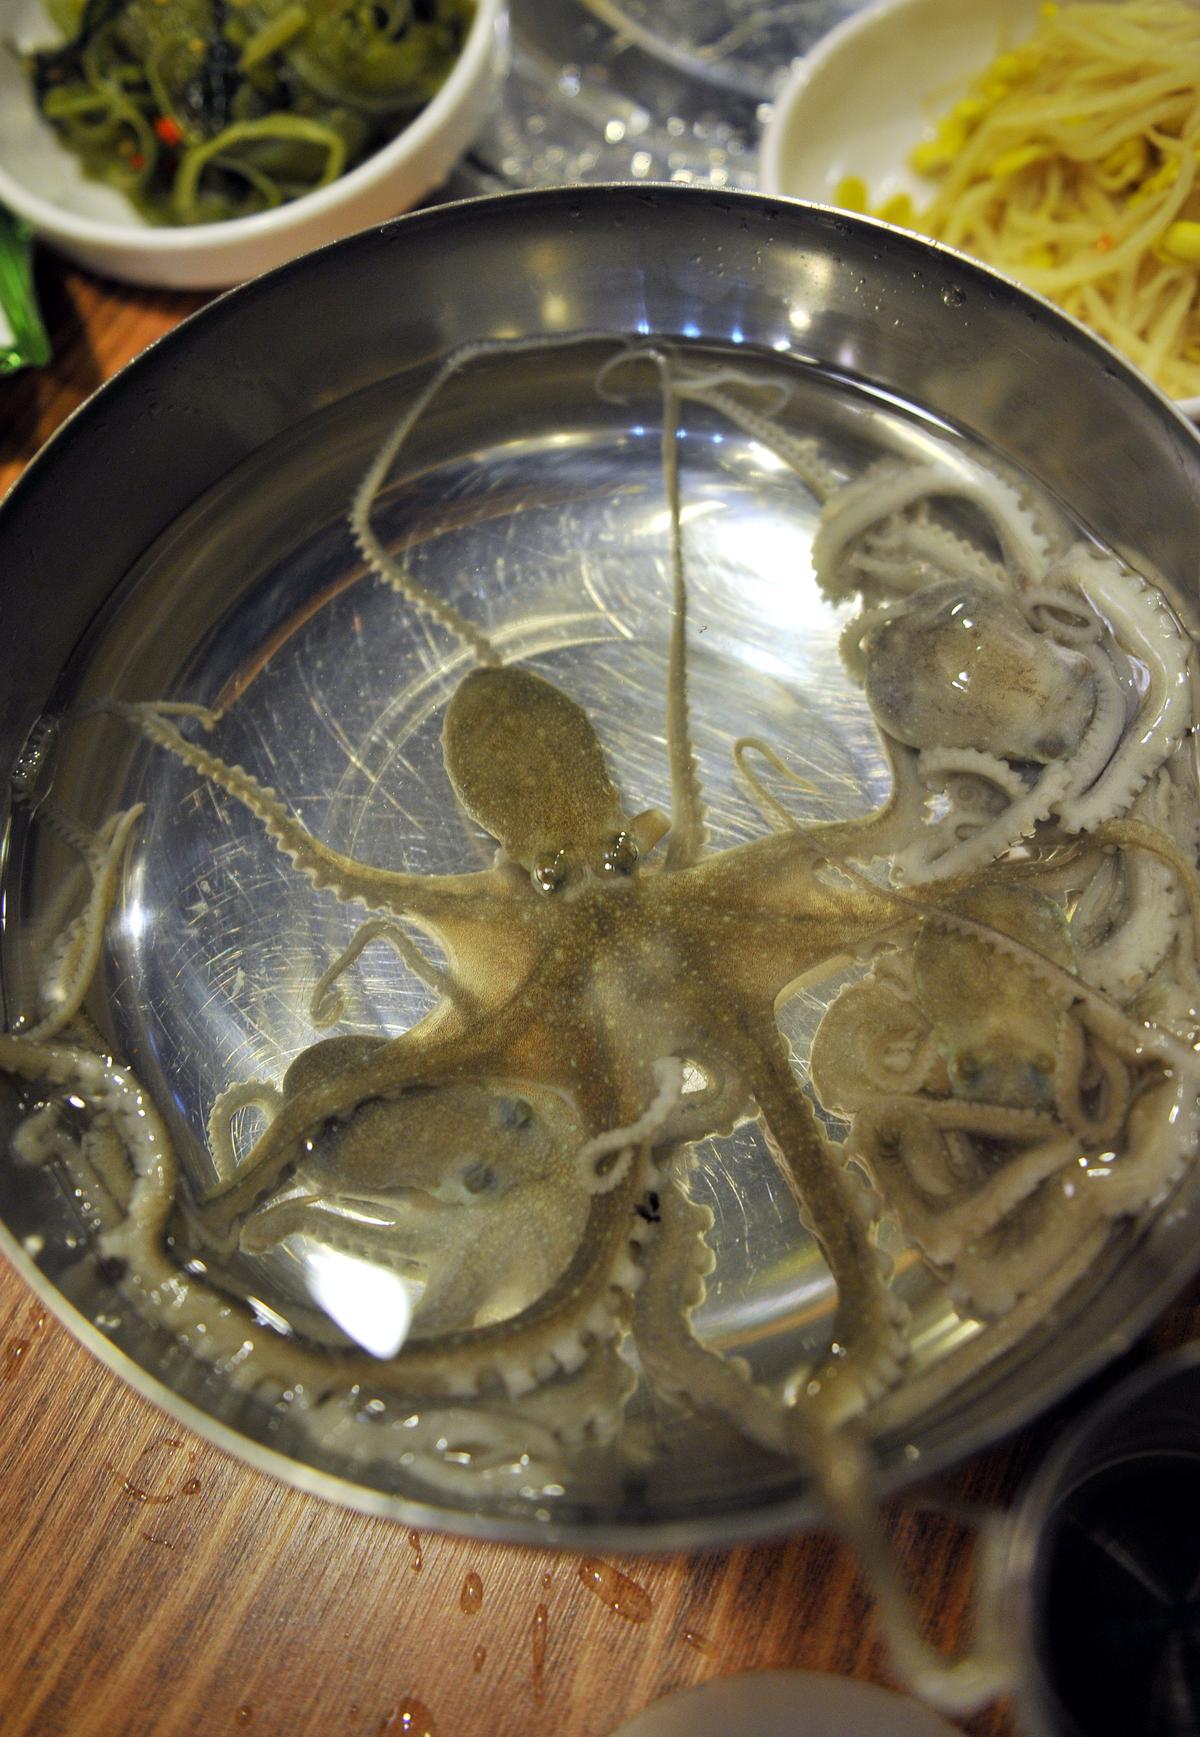 Live baby octopus are placed in a bowl along with other foods on a table in a restaurant in in Mokpo, Korea. (Jung Yeon-Je/AFP/GettyImages)